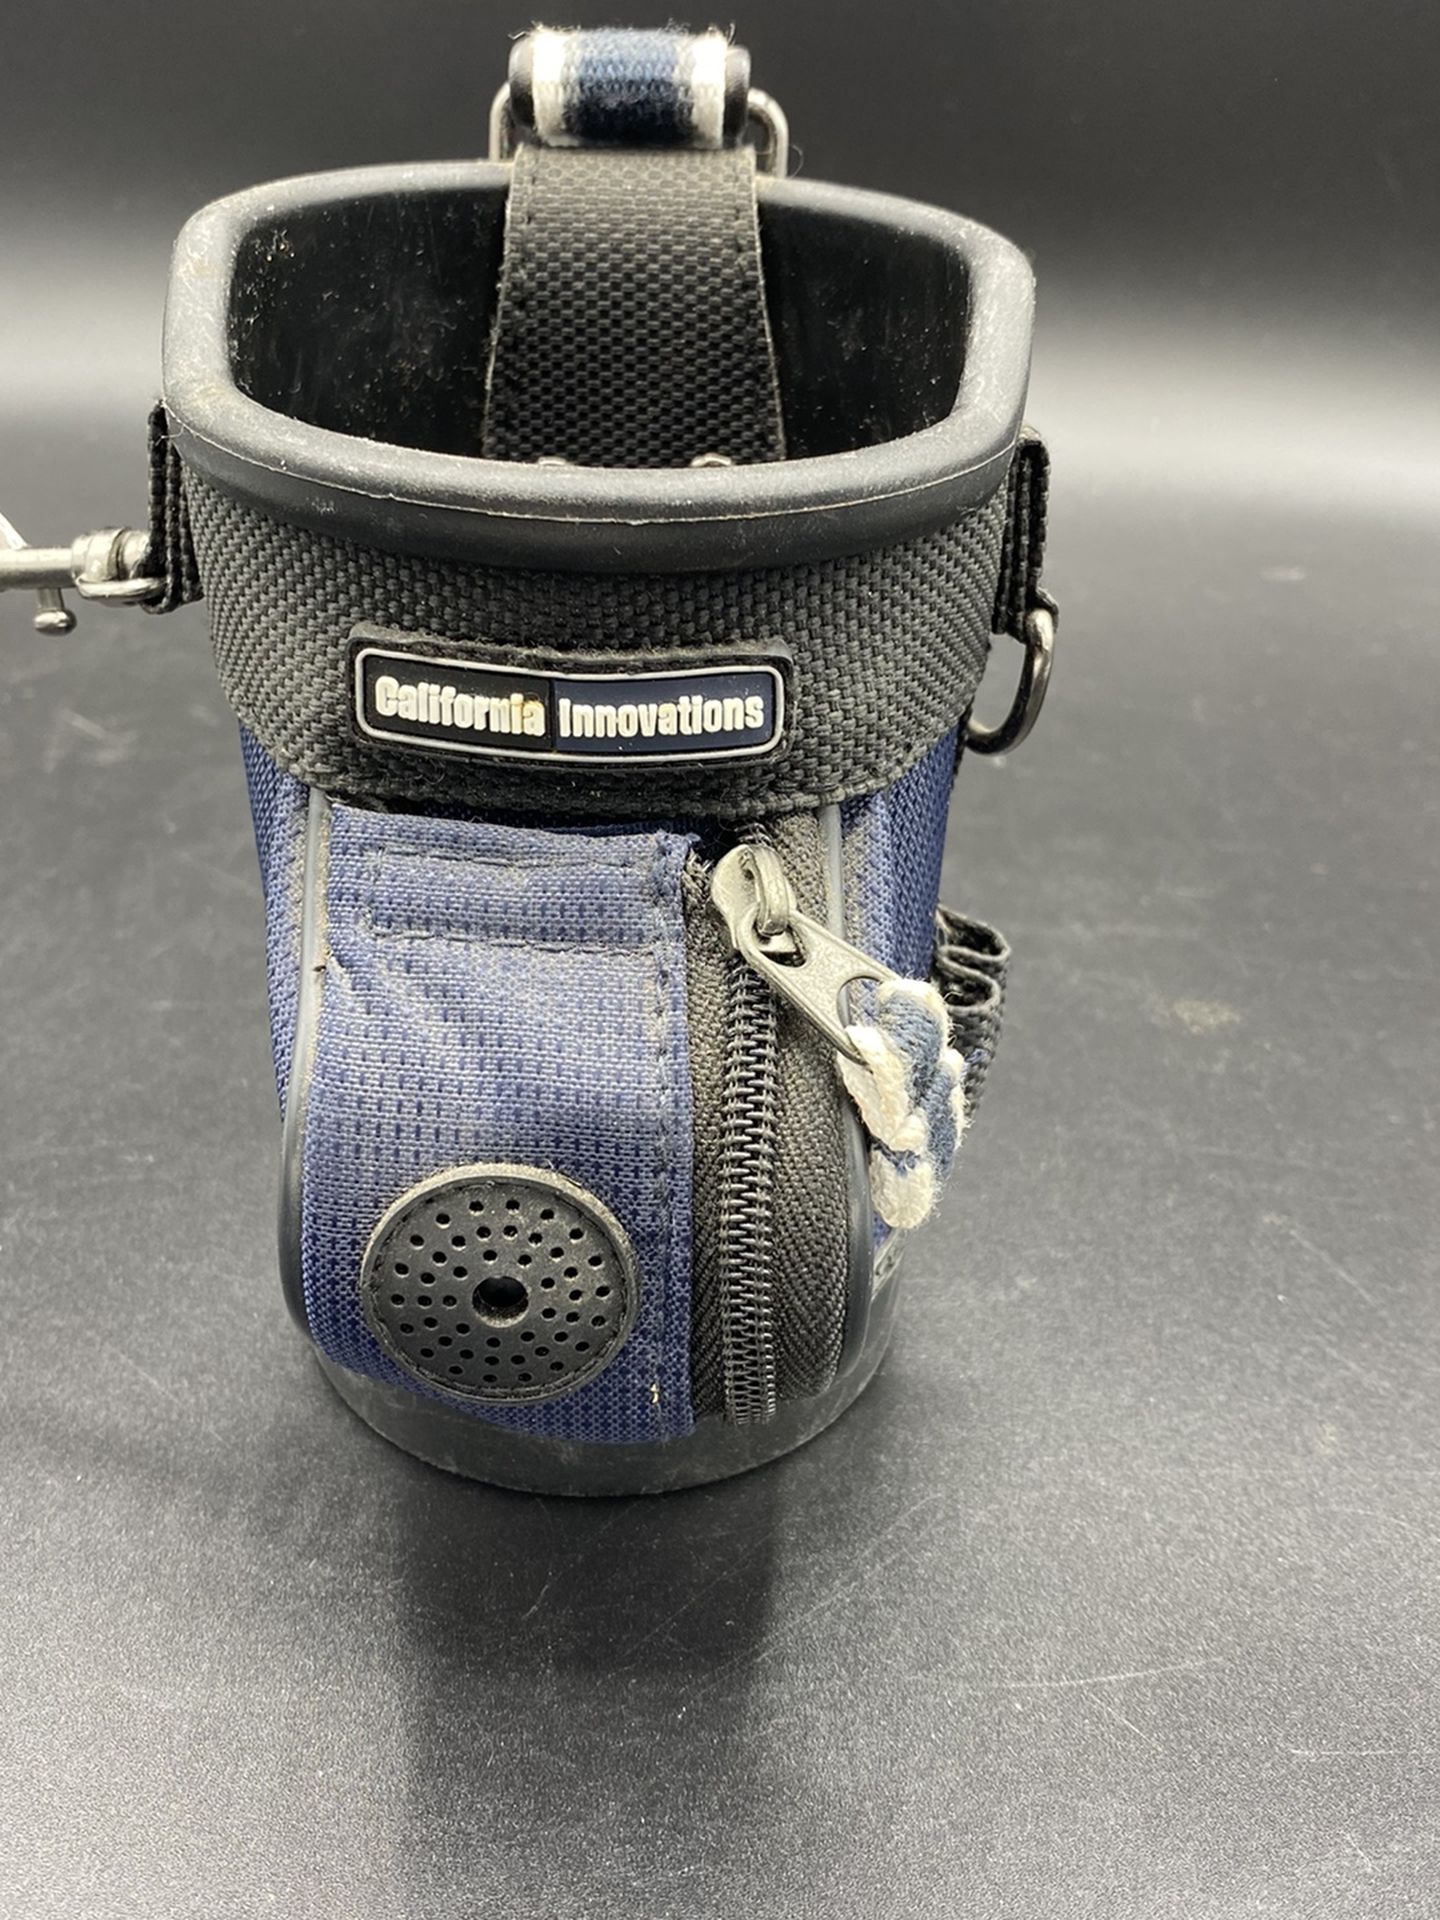 California Innovations Golf Bag Insulated Koozie Black & Blue - Great Condition